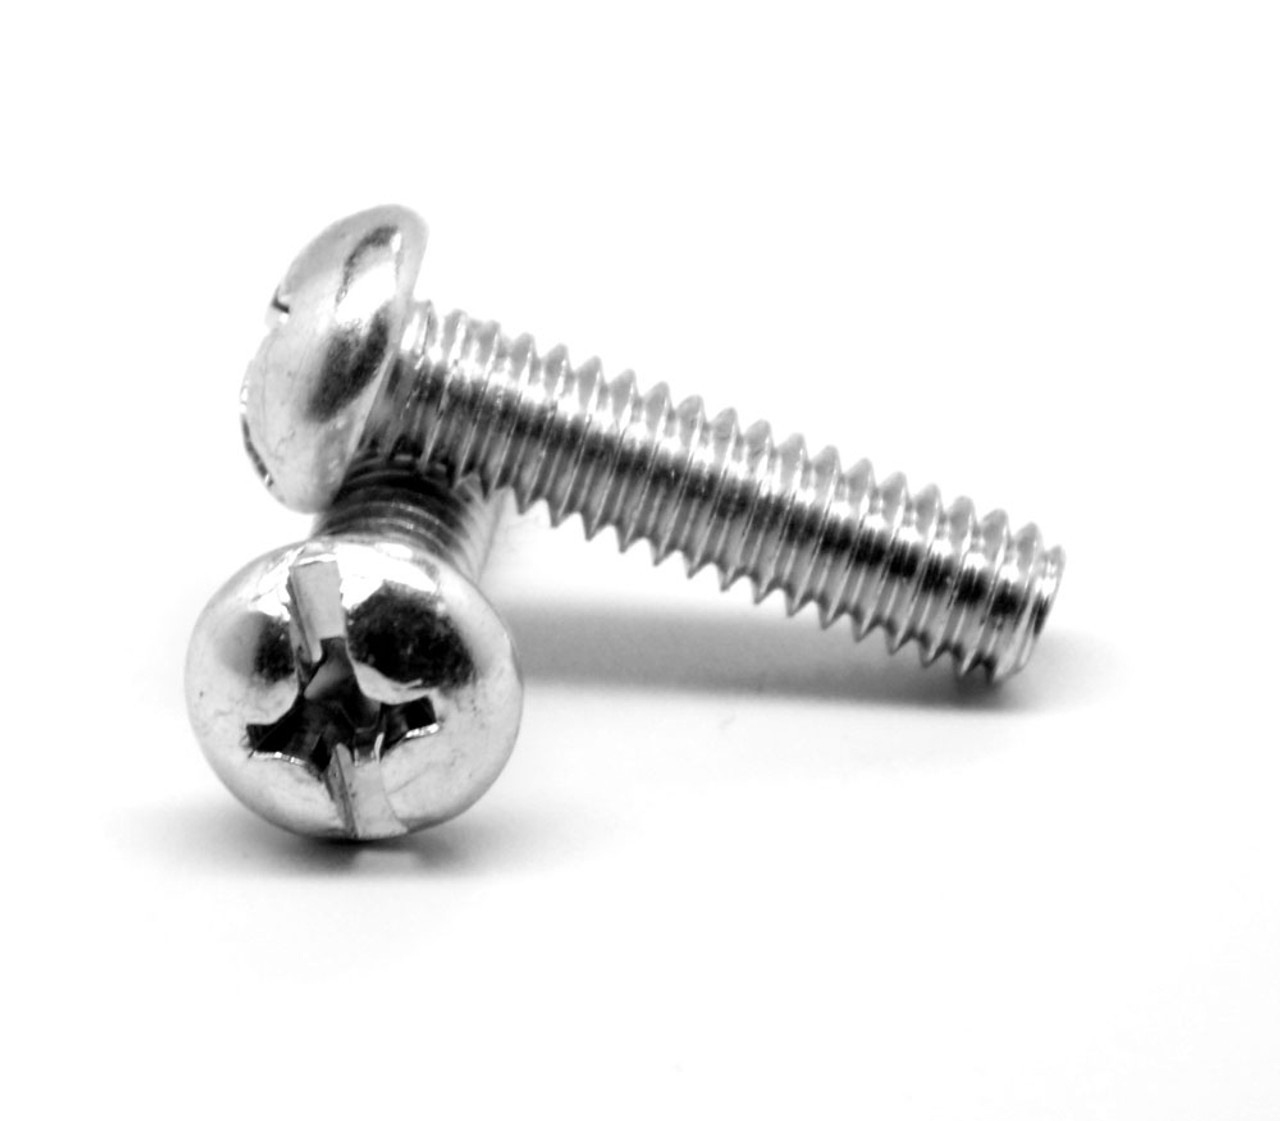 #8-32 x 3 1/2" (FT) Coarse Thread Machine Screw Combo (Phillips/Slotted) Round Head Low Carbon Steel Zinc Plated